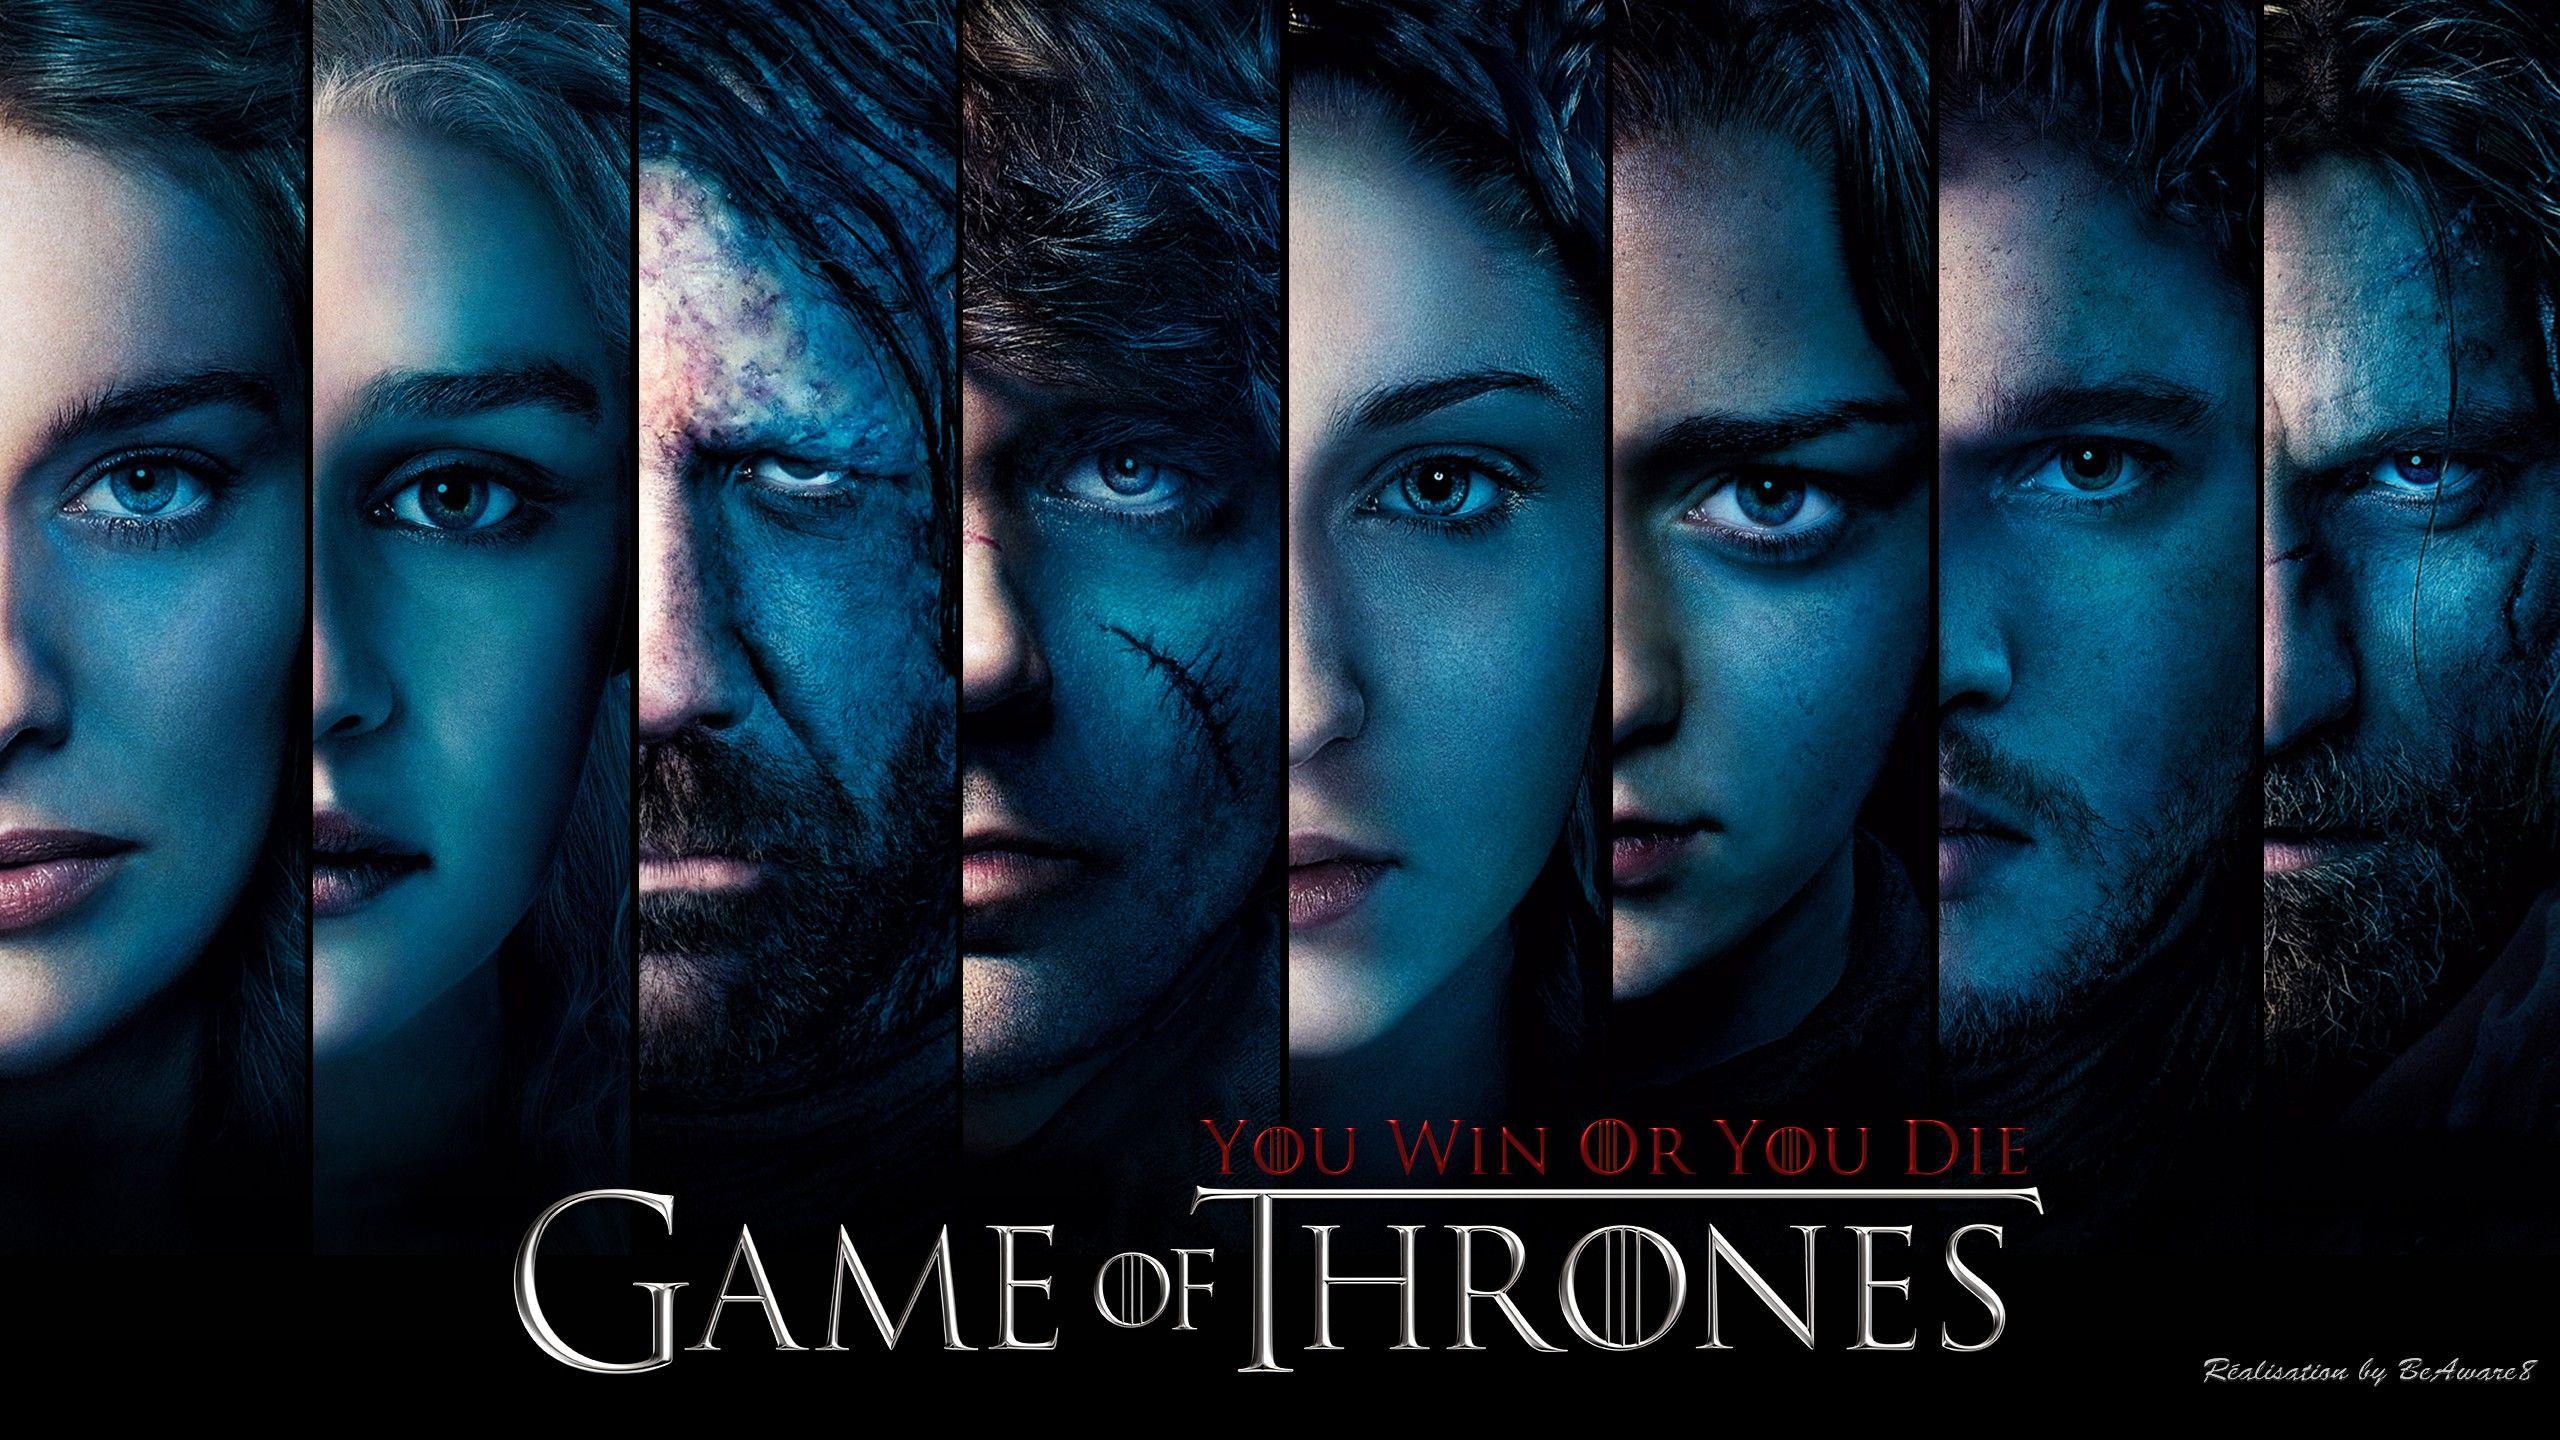 Game of Thrones wallpaperDownload free awesome full HD